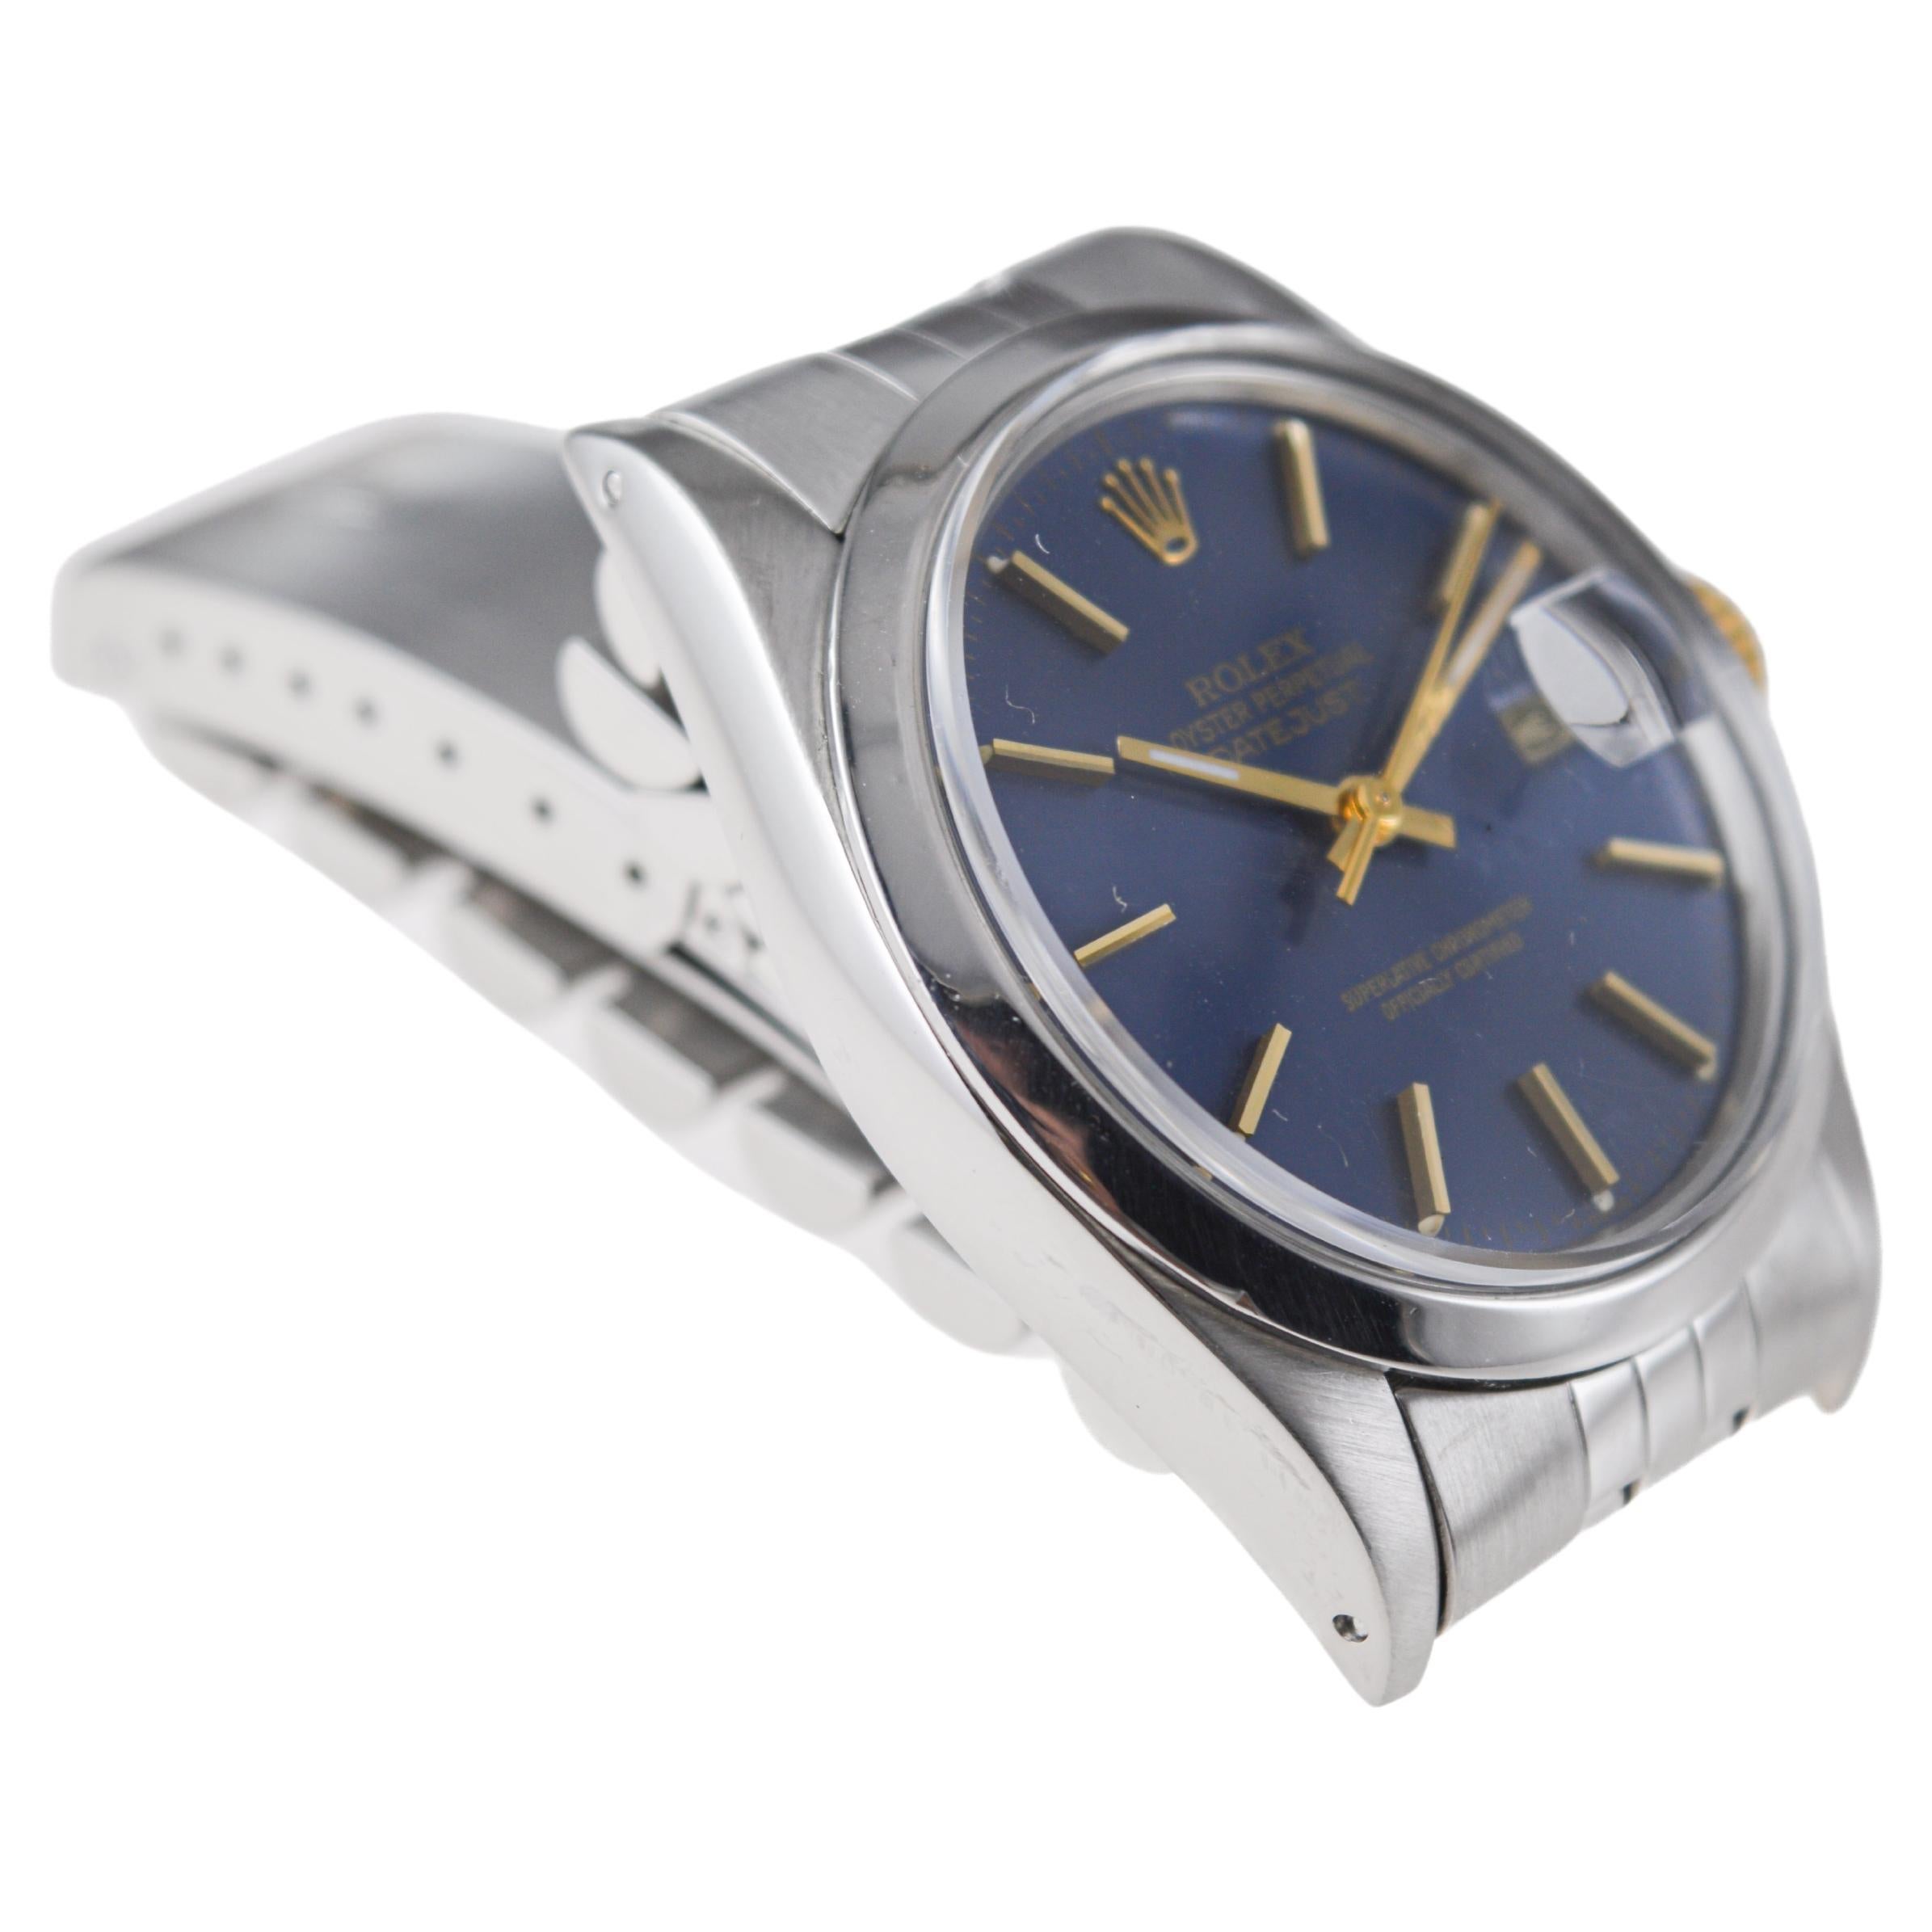 Women's or Men's Rolex Steel Oyster Perpetual Datejust with Rare Original Blue Dial from 1987 For Sale